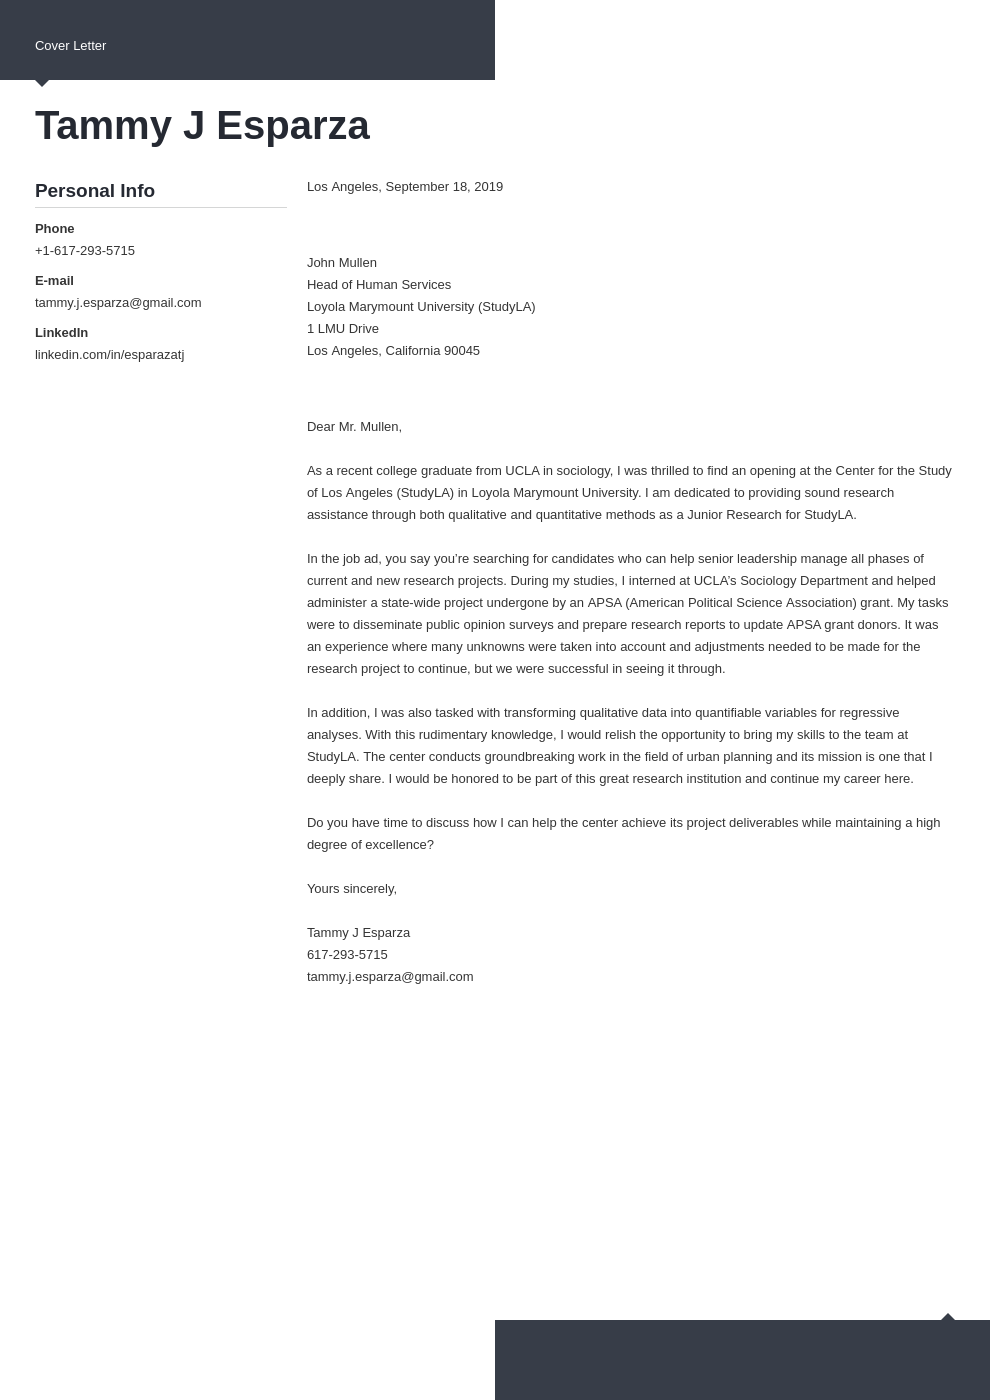 Research Assistant Cover Letter Sample & Template for 2022